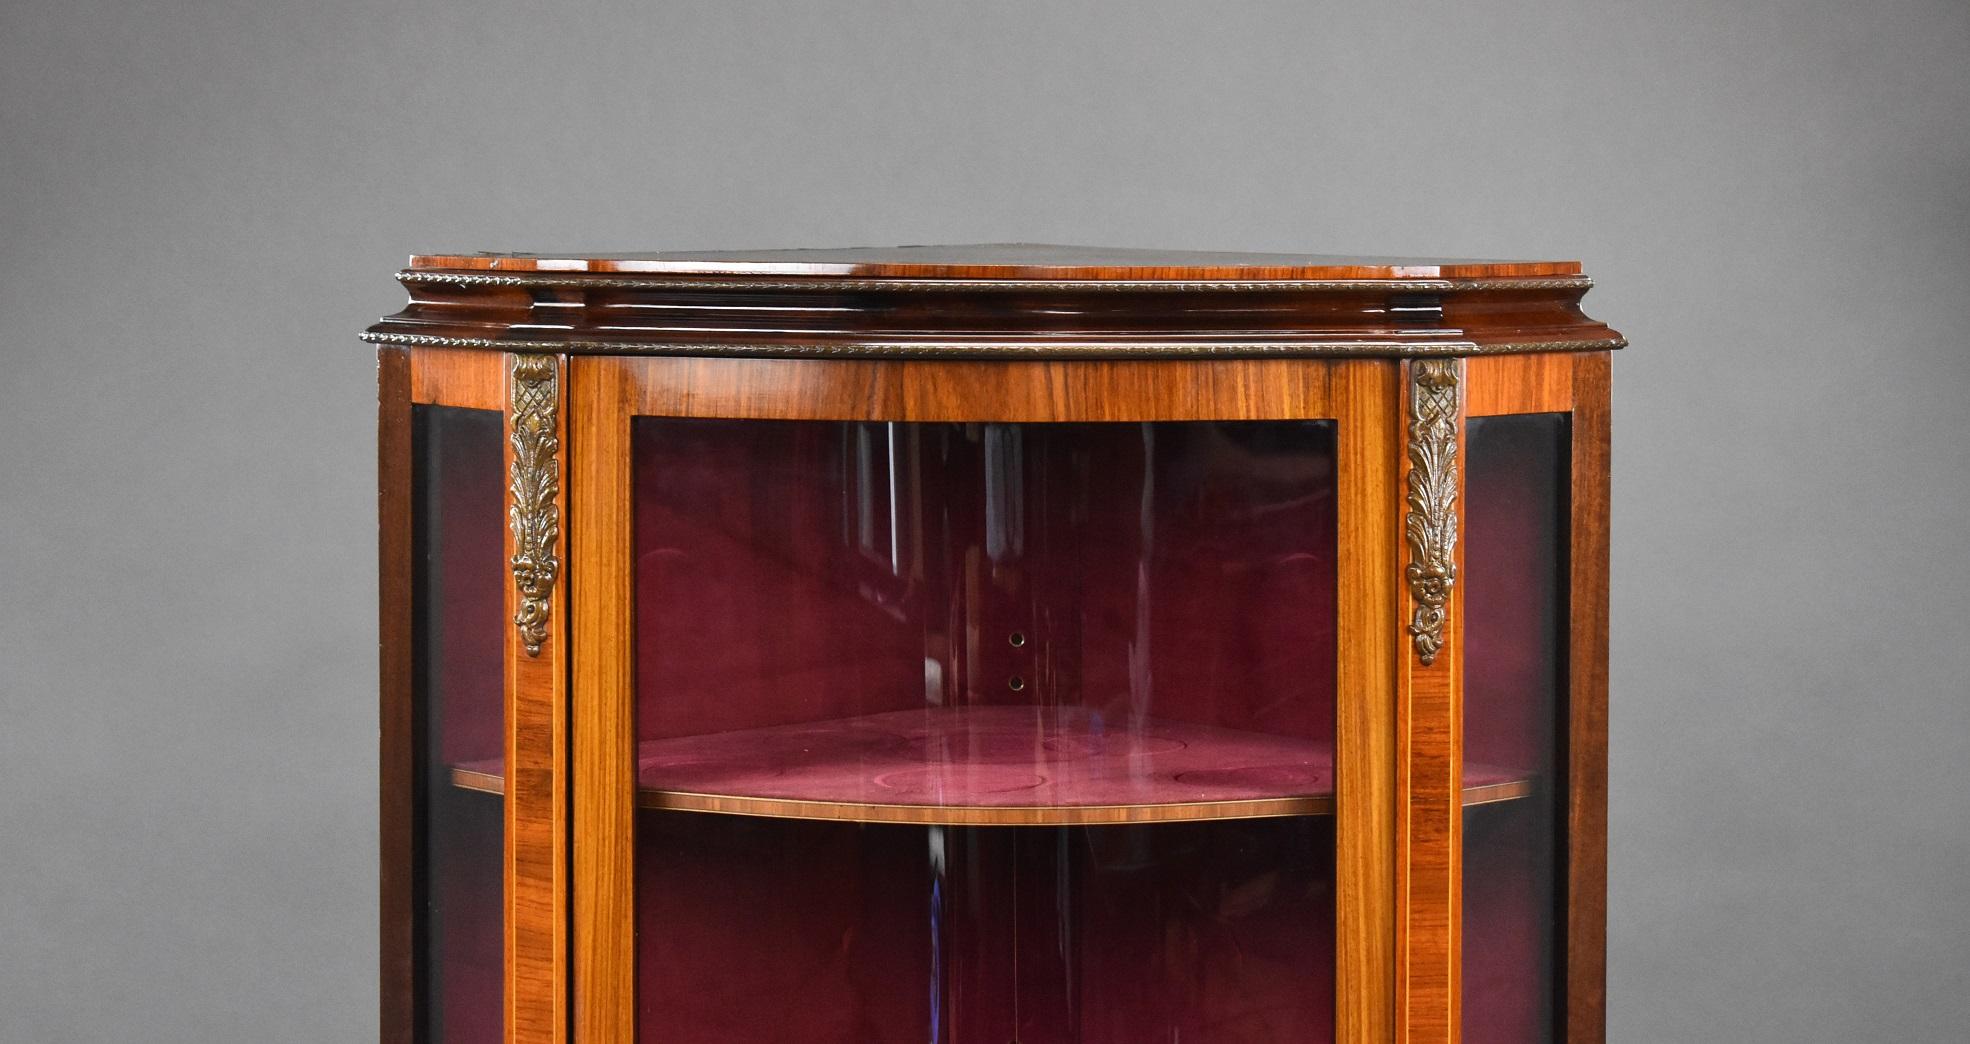 French style bow fronted corner cabinet in good condition with ormolu style mounts to the top and bottom with a flower decoration. The cabinet has three shelves covered in a dark pink fabric.